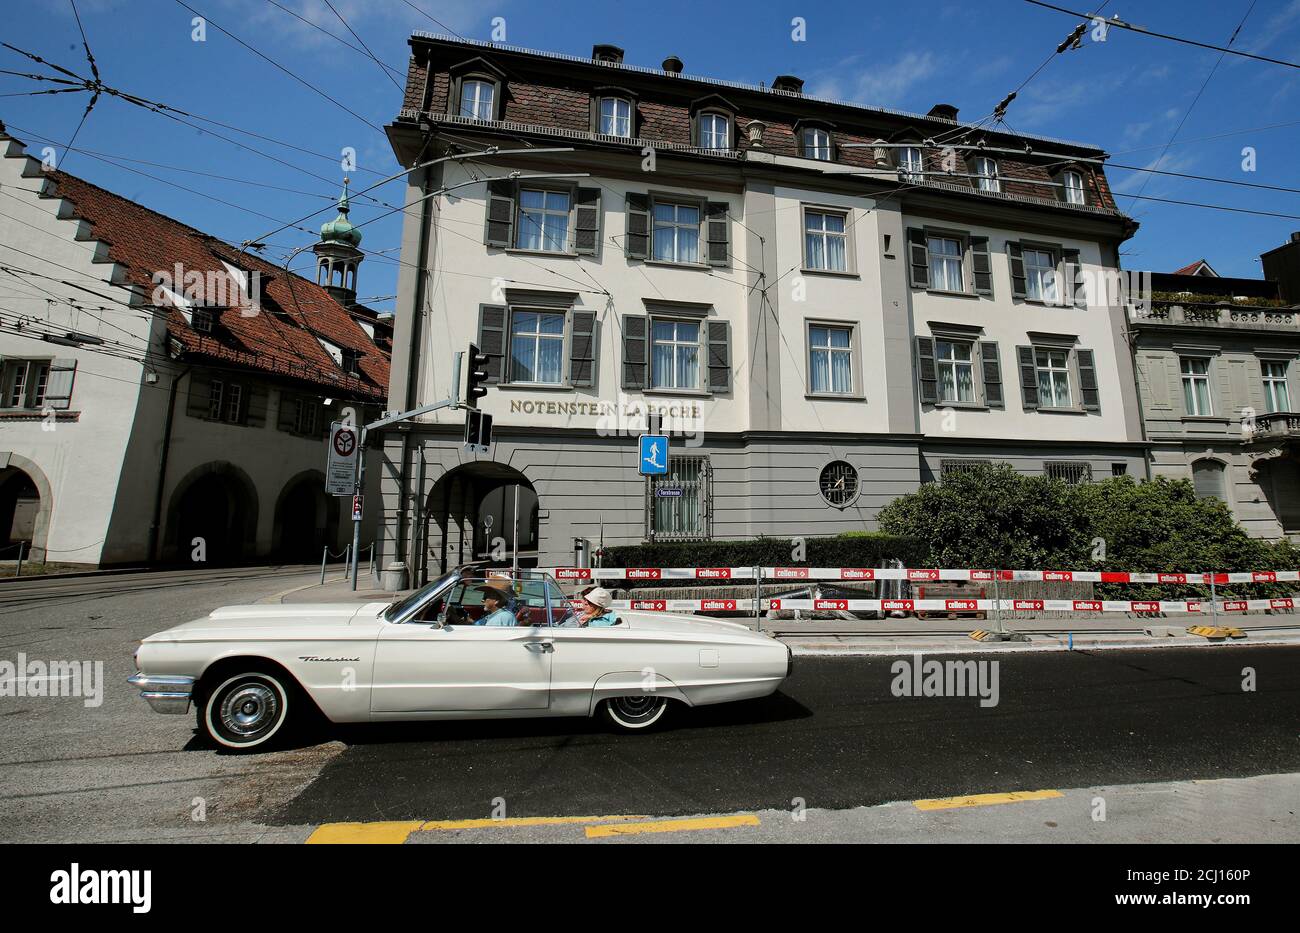 A vintage Ford Thunderbird car drives past the headquarters of Swiss  private bank Notenstein La Roche in St. Gallen, Switzerland July 14, 2018.  Picture taken July14, 2018. REUTERS/Arnd Wiegmann Stock Photo - Alamy